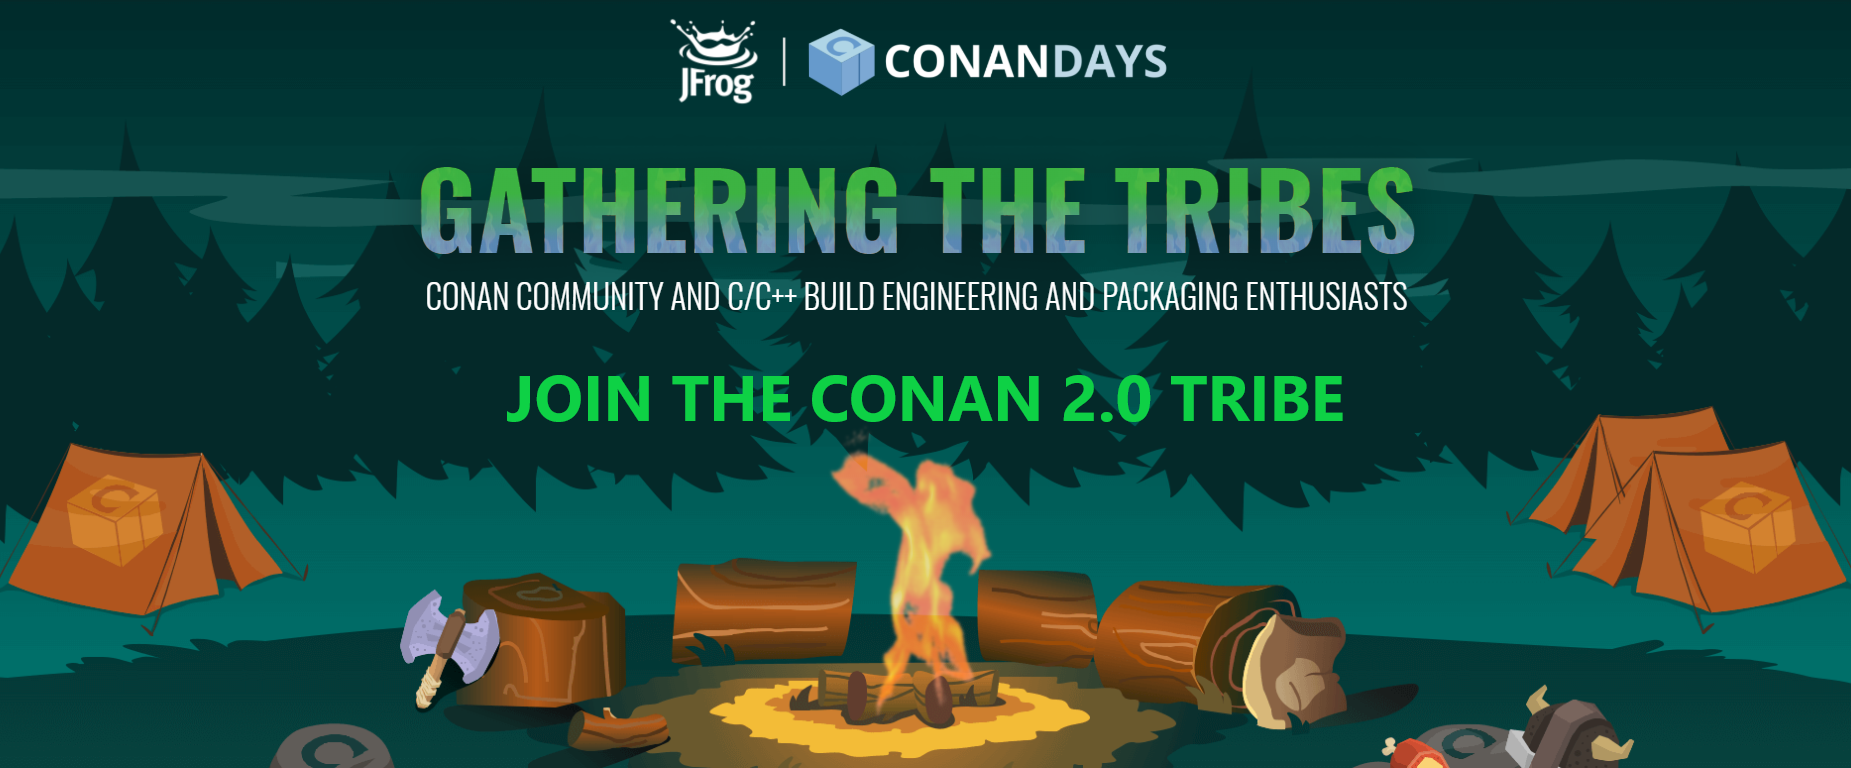 Join the Conan 2.0 Tribe